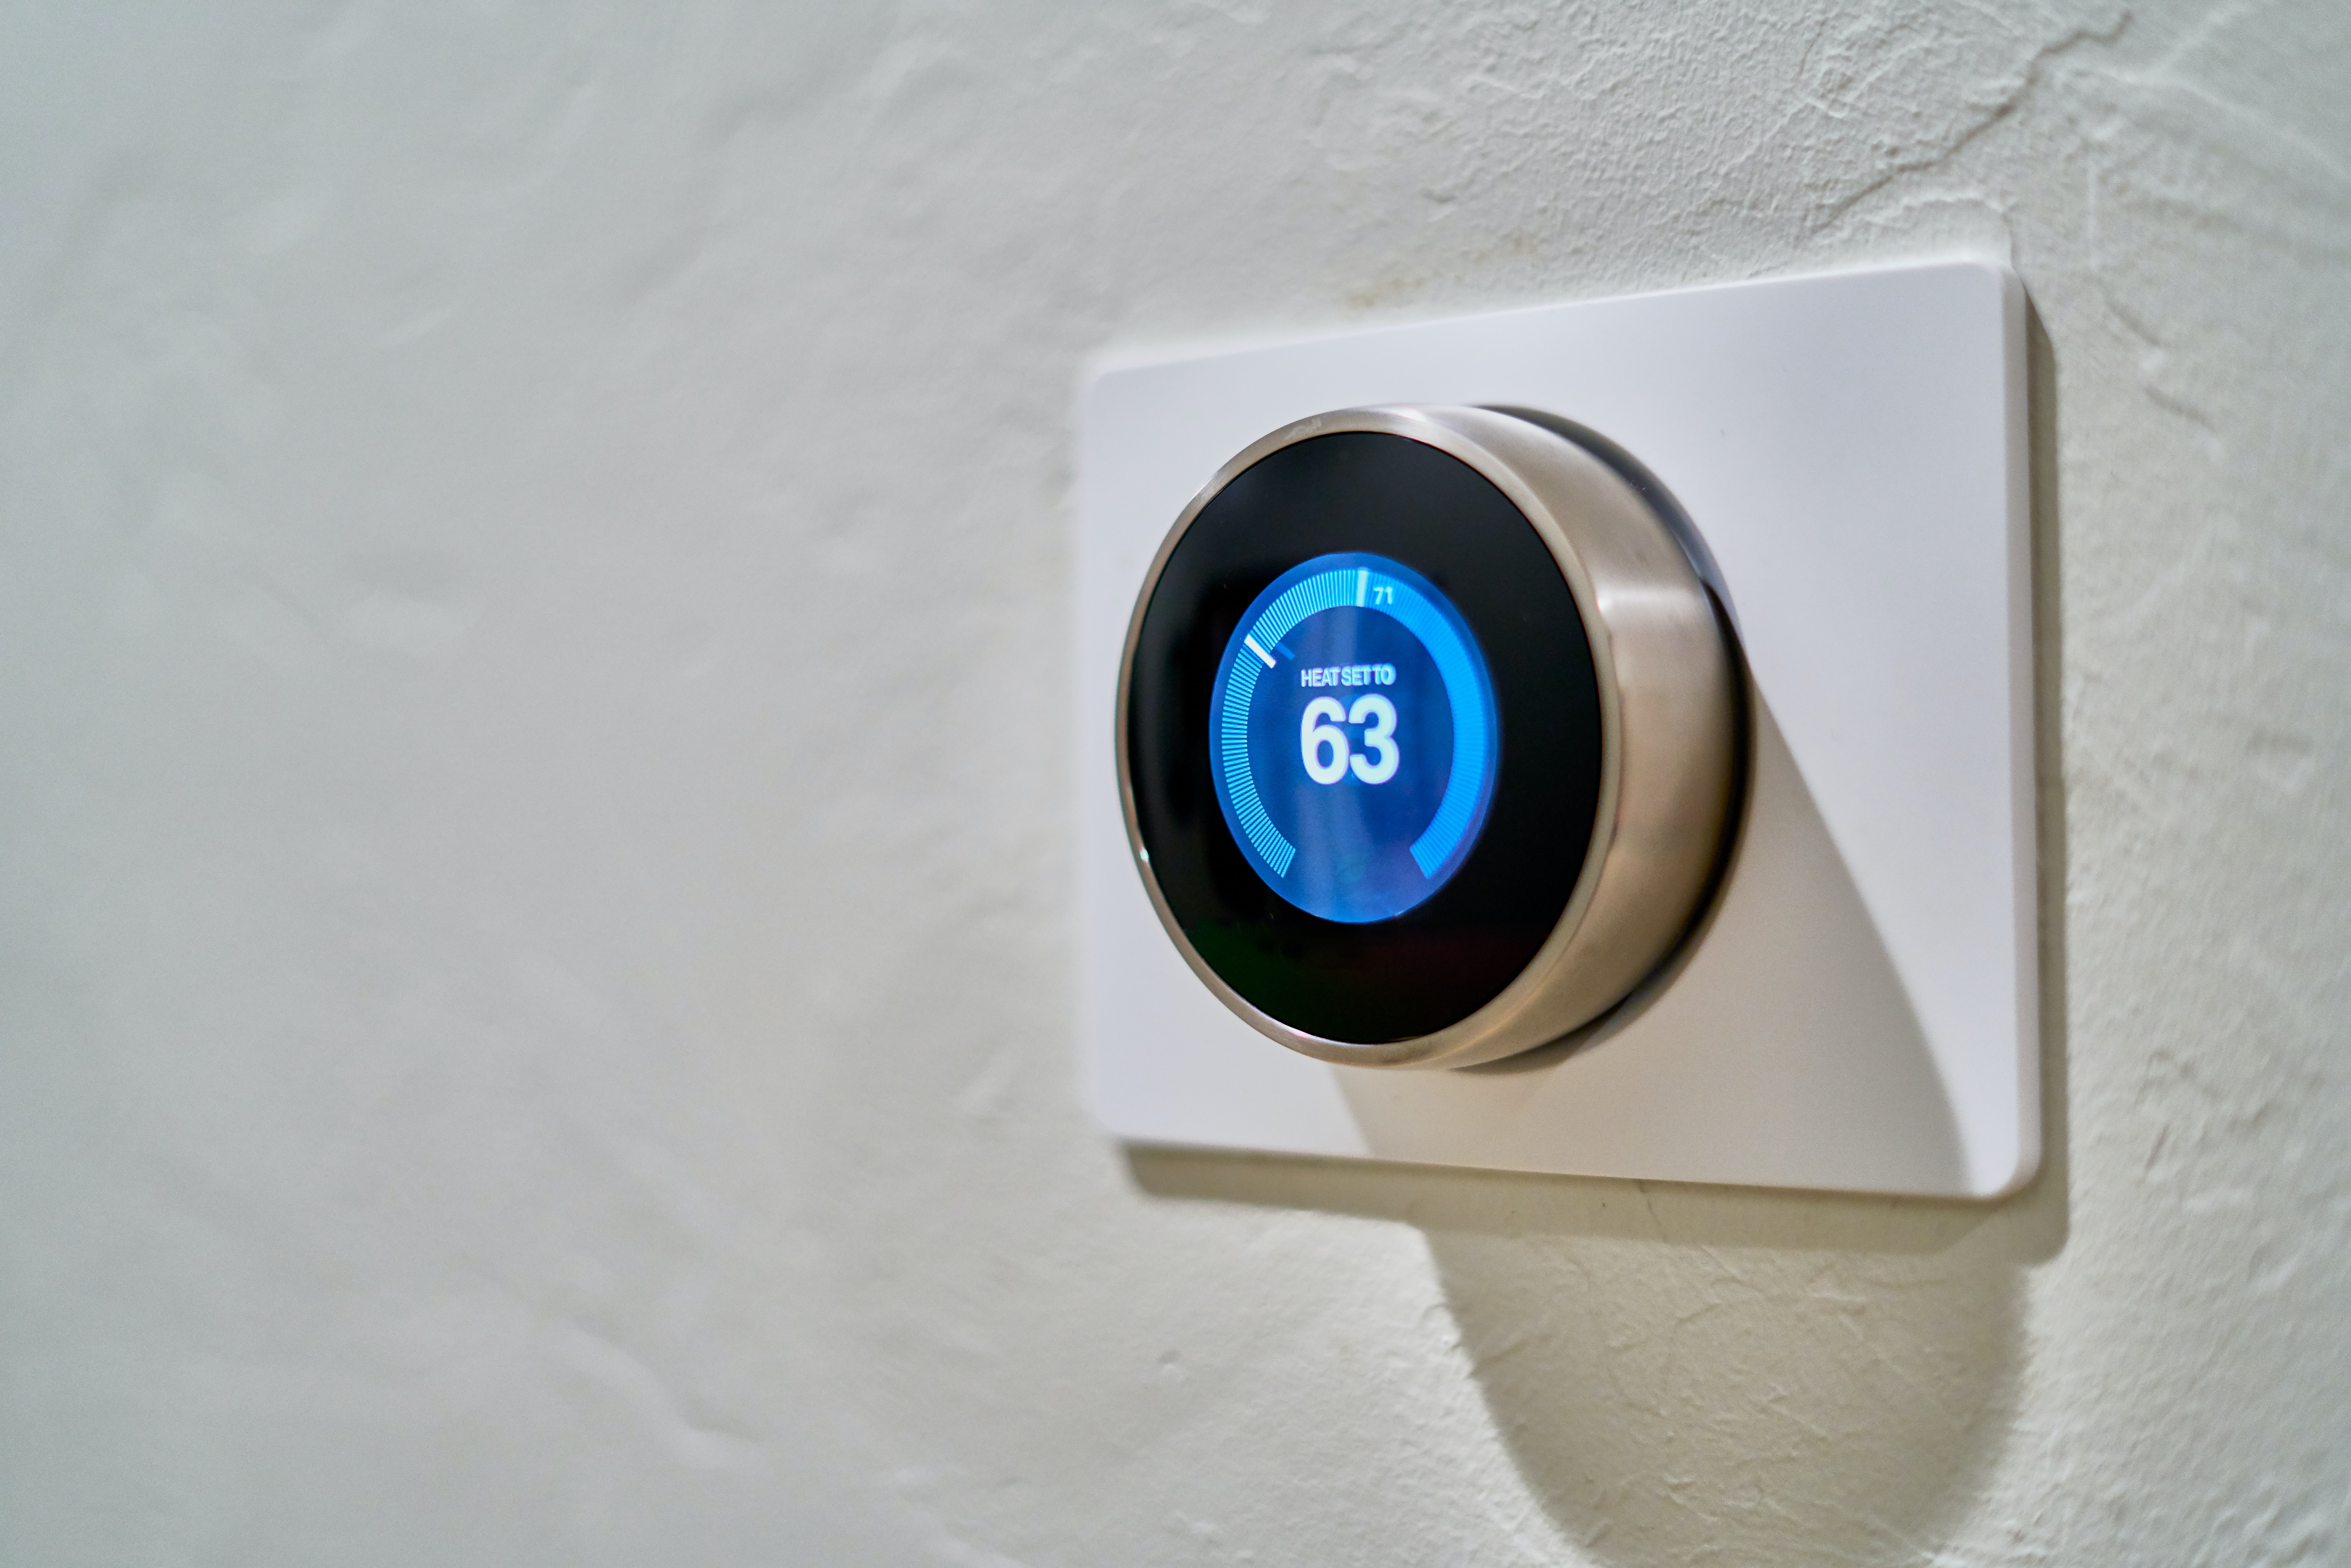 google nest thermostat on wall at 63 degrees